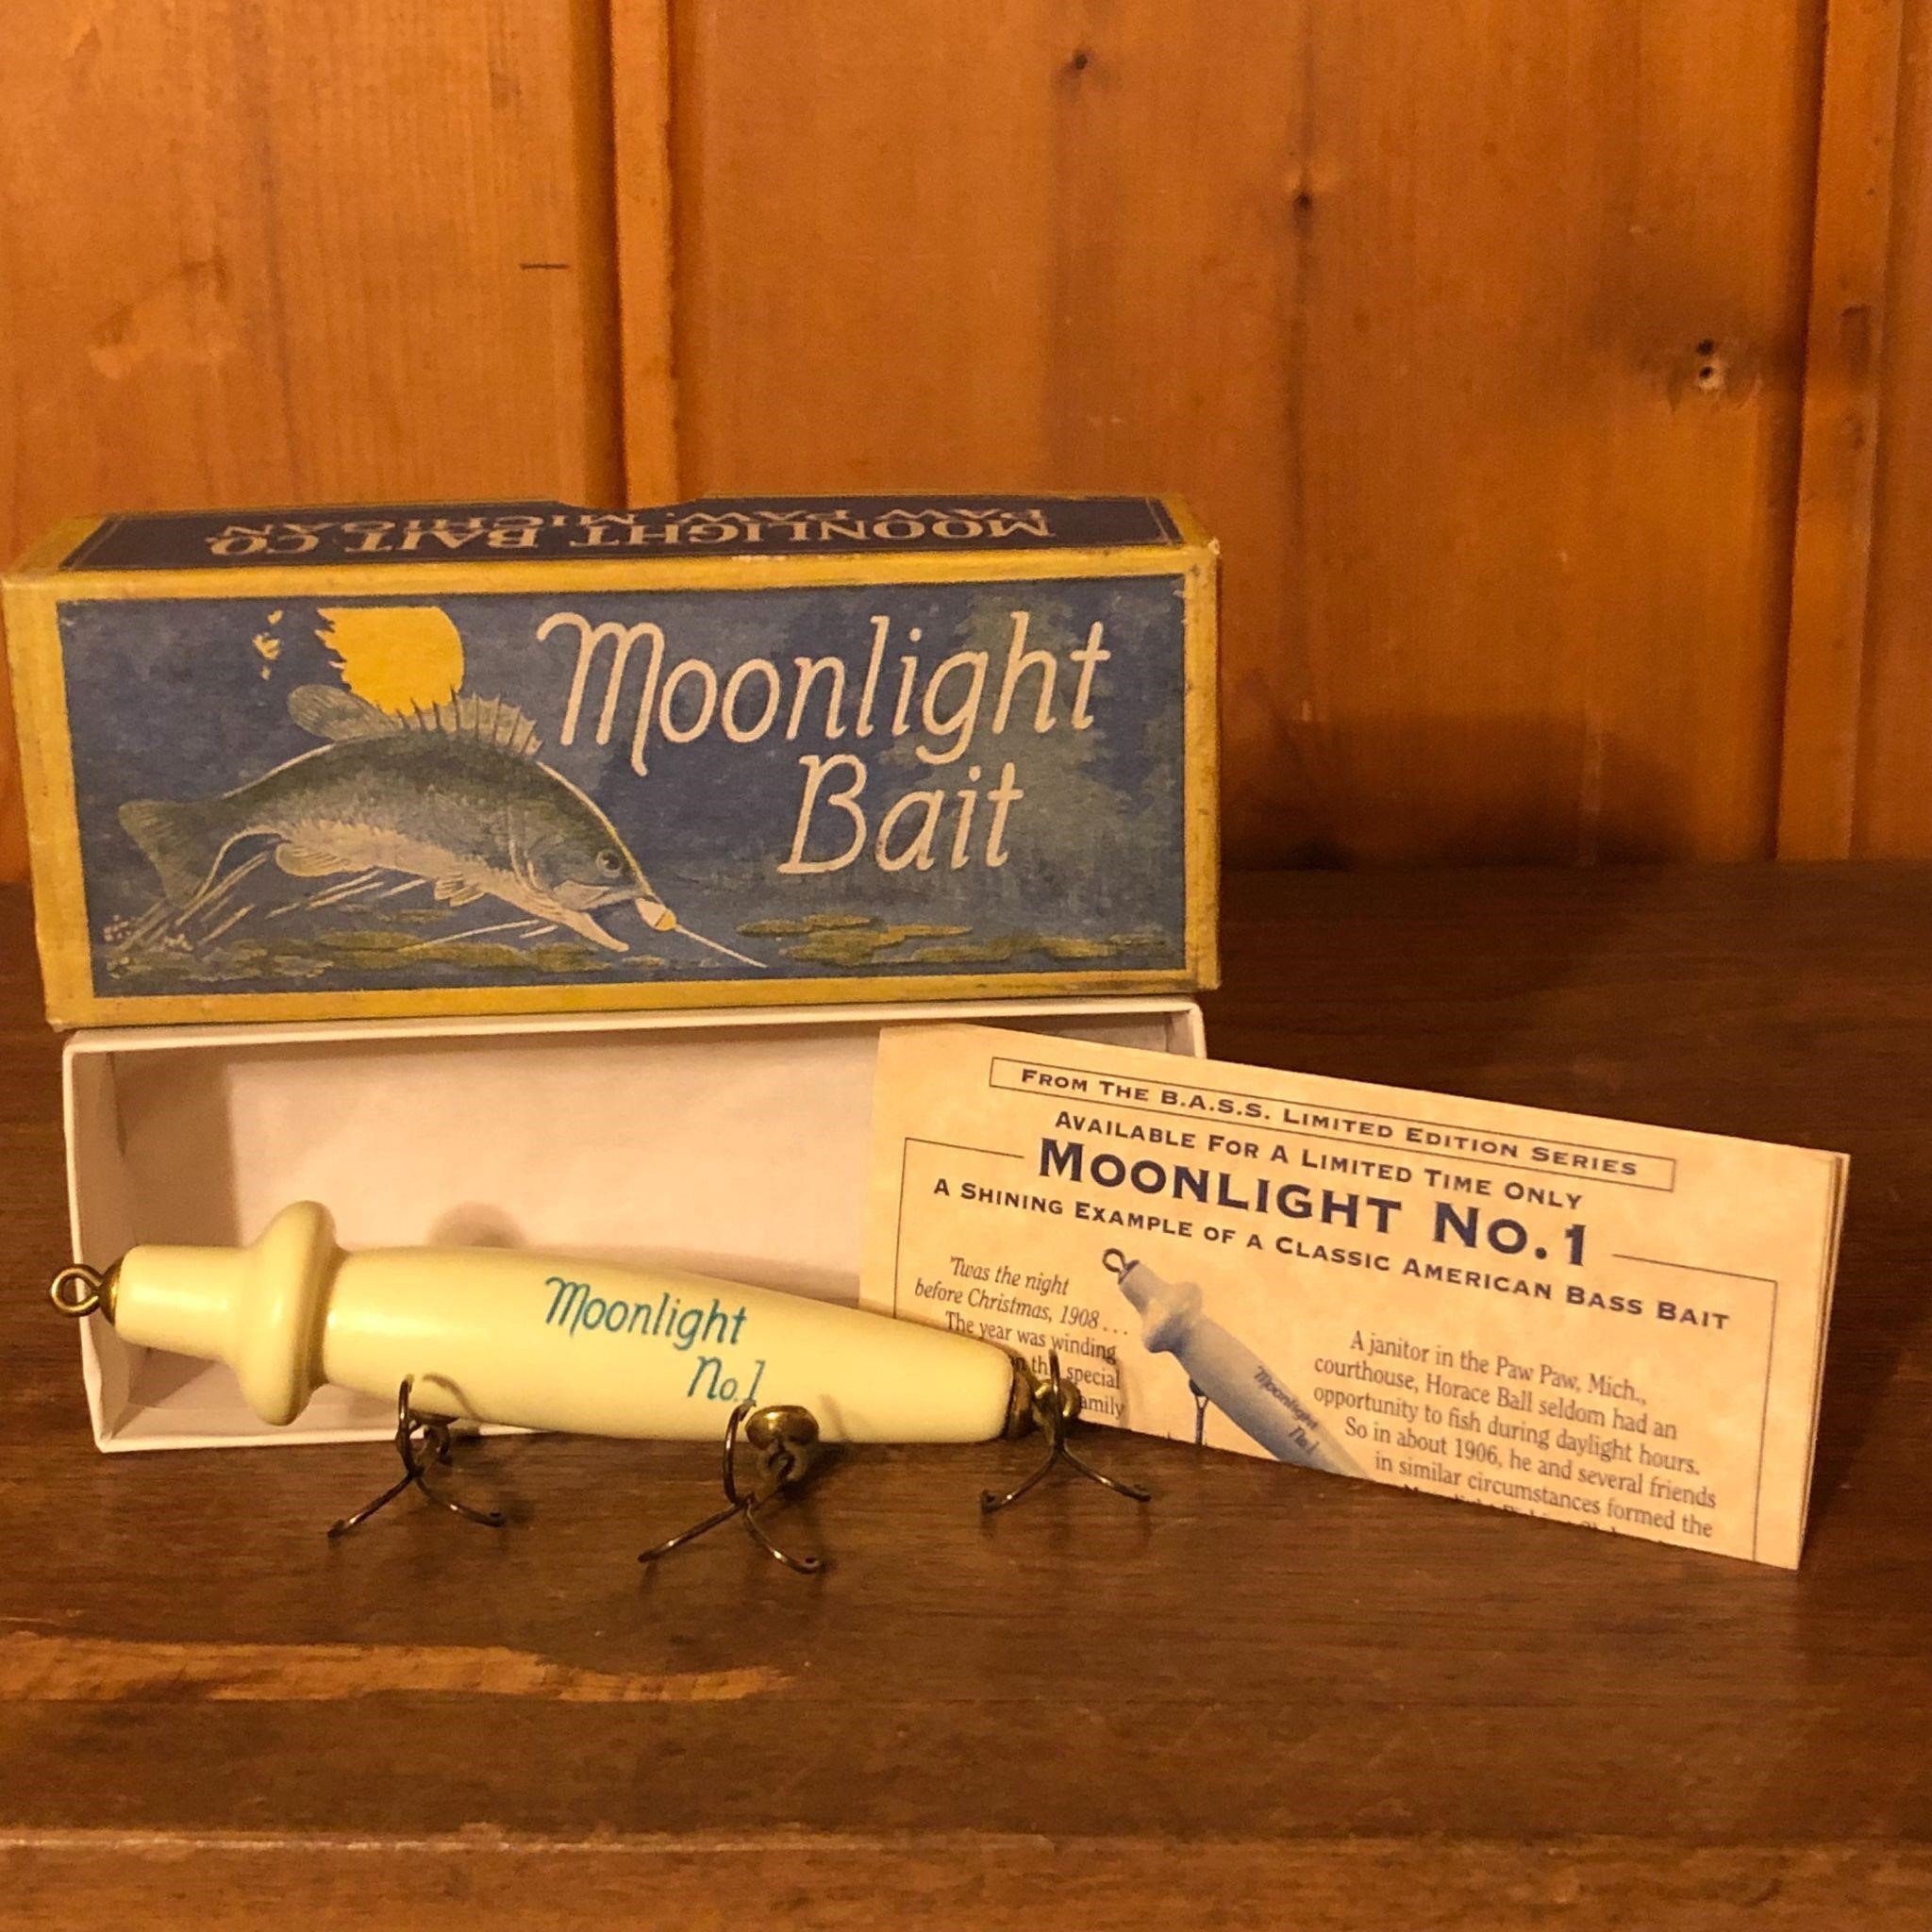 2001 Bass Collector Moonlight Bait Fishing Lure